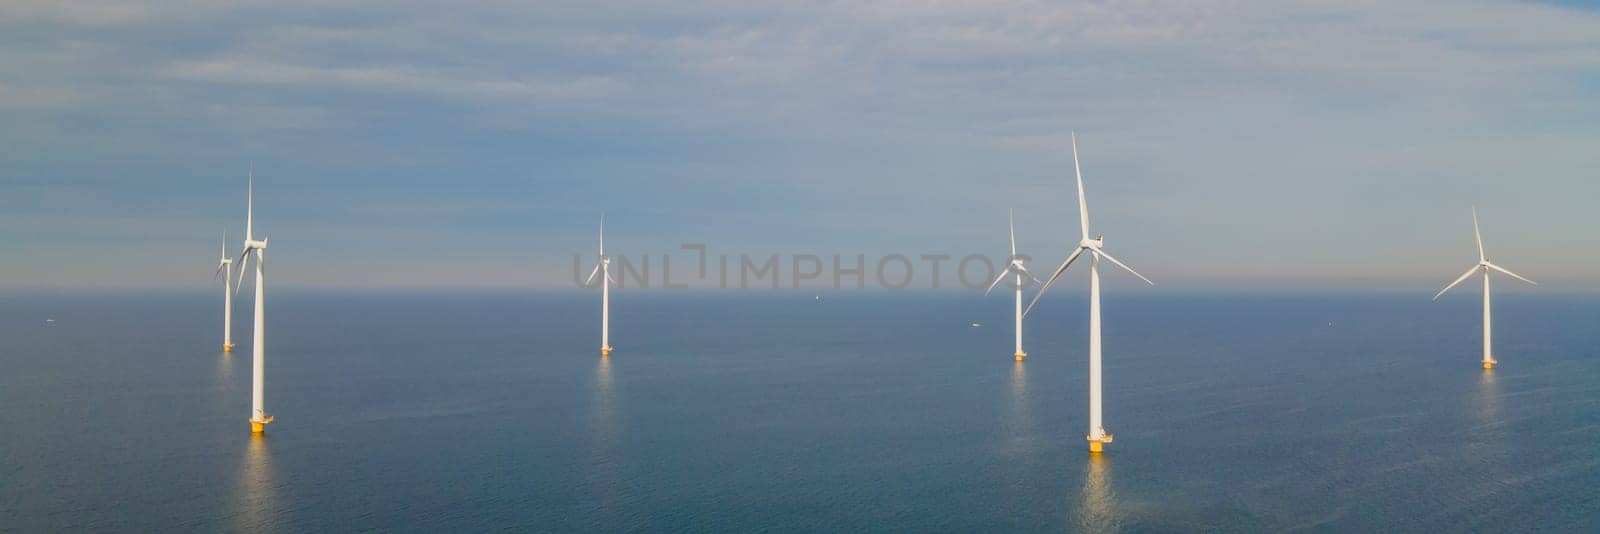 A photo of an offshore wind farm with turbines in the ocean in the Netherlands